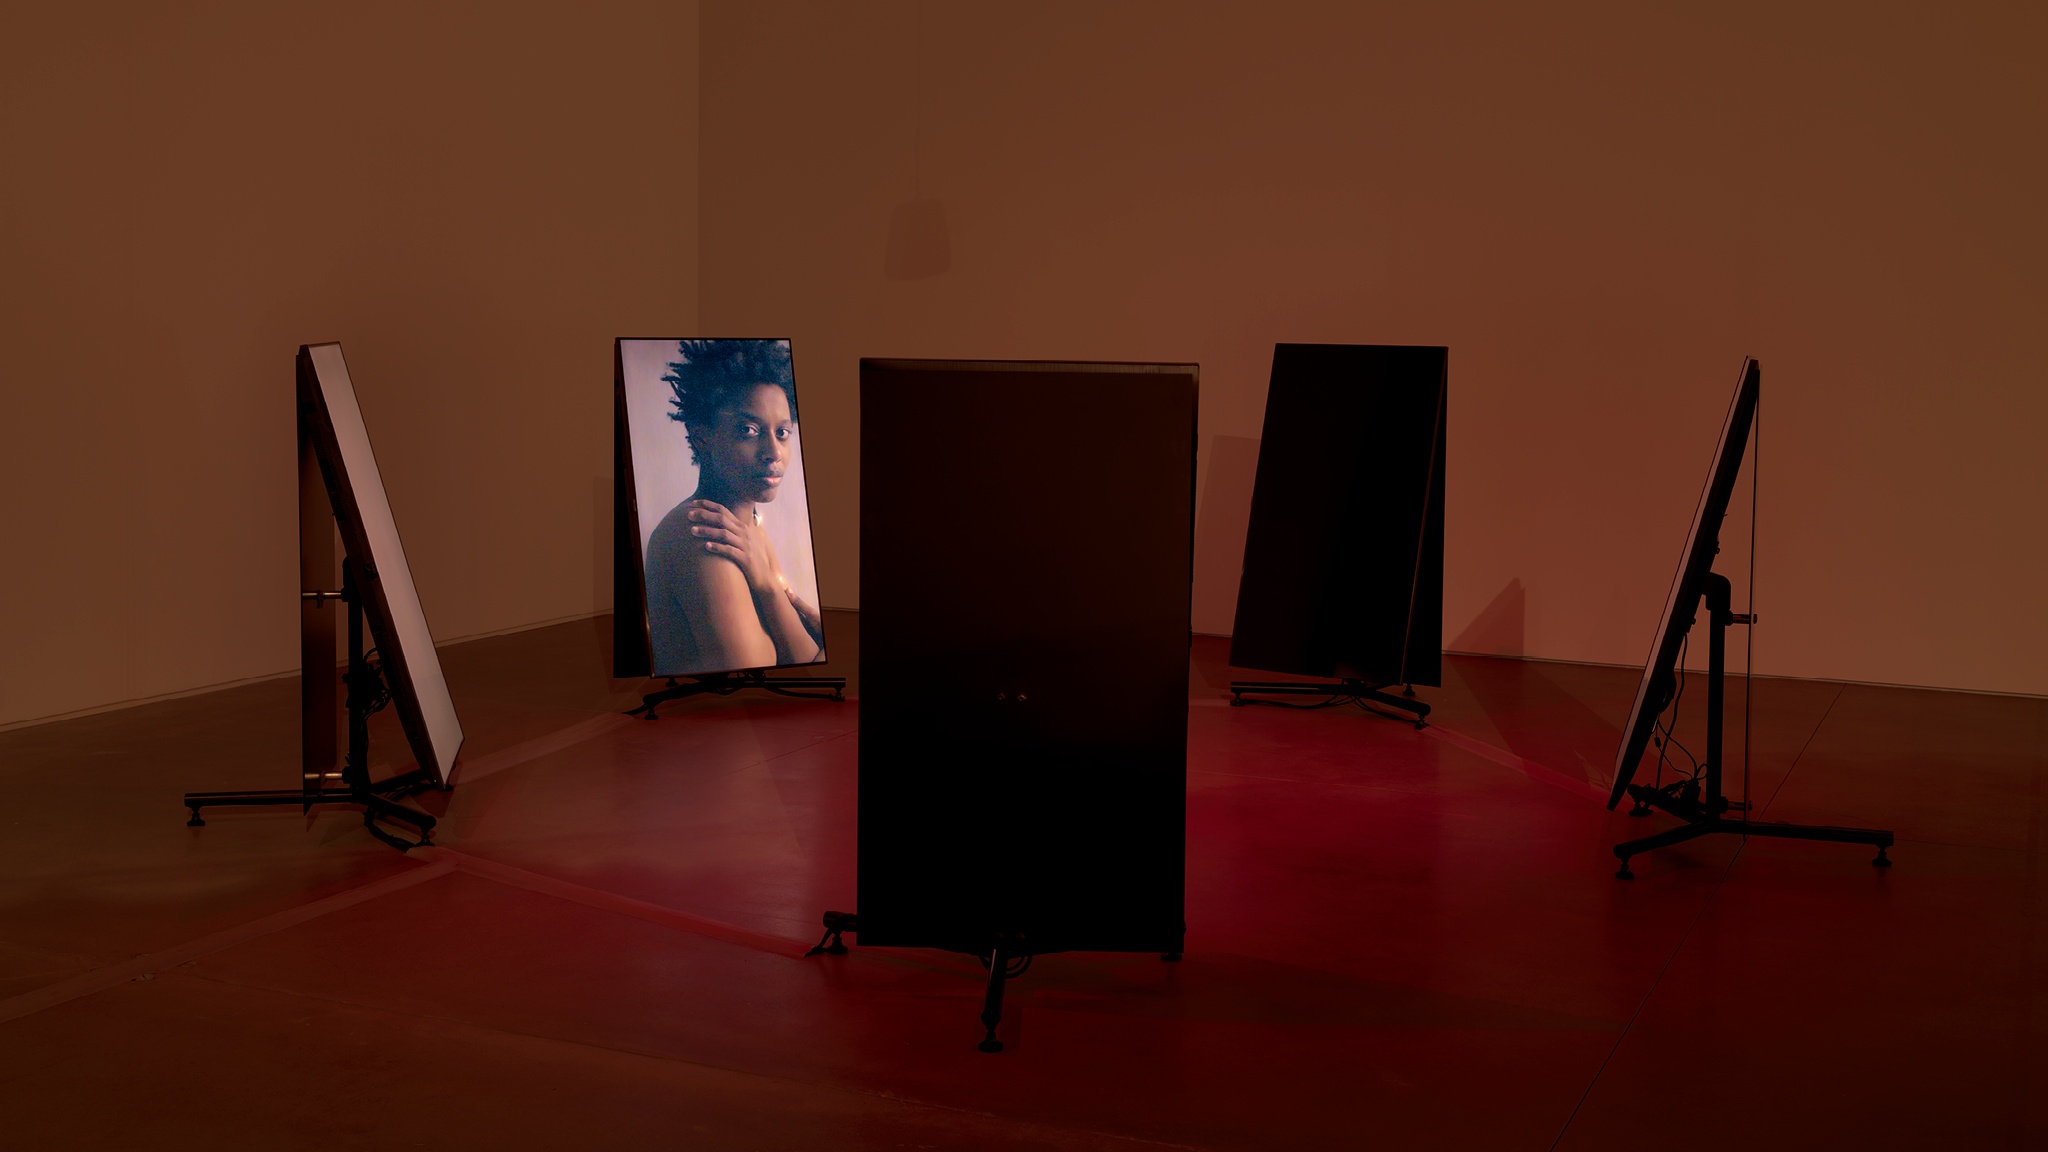 A circle of five video screens standing upright and facing inward toward each other in a gallery space. The space is lit with a diffuse red light and on one of the screens the artist Le'Andra LeSeur looks out of the video frame over her shoulder, as if at the camera.